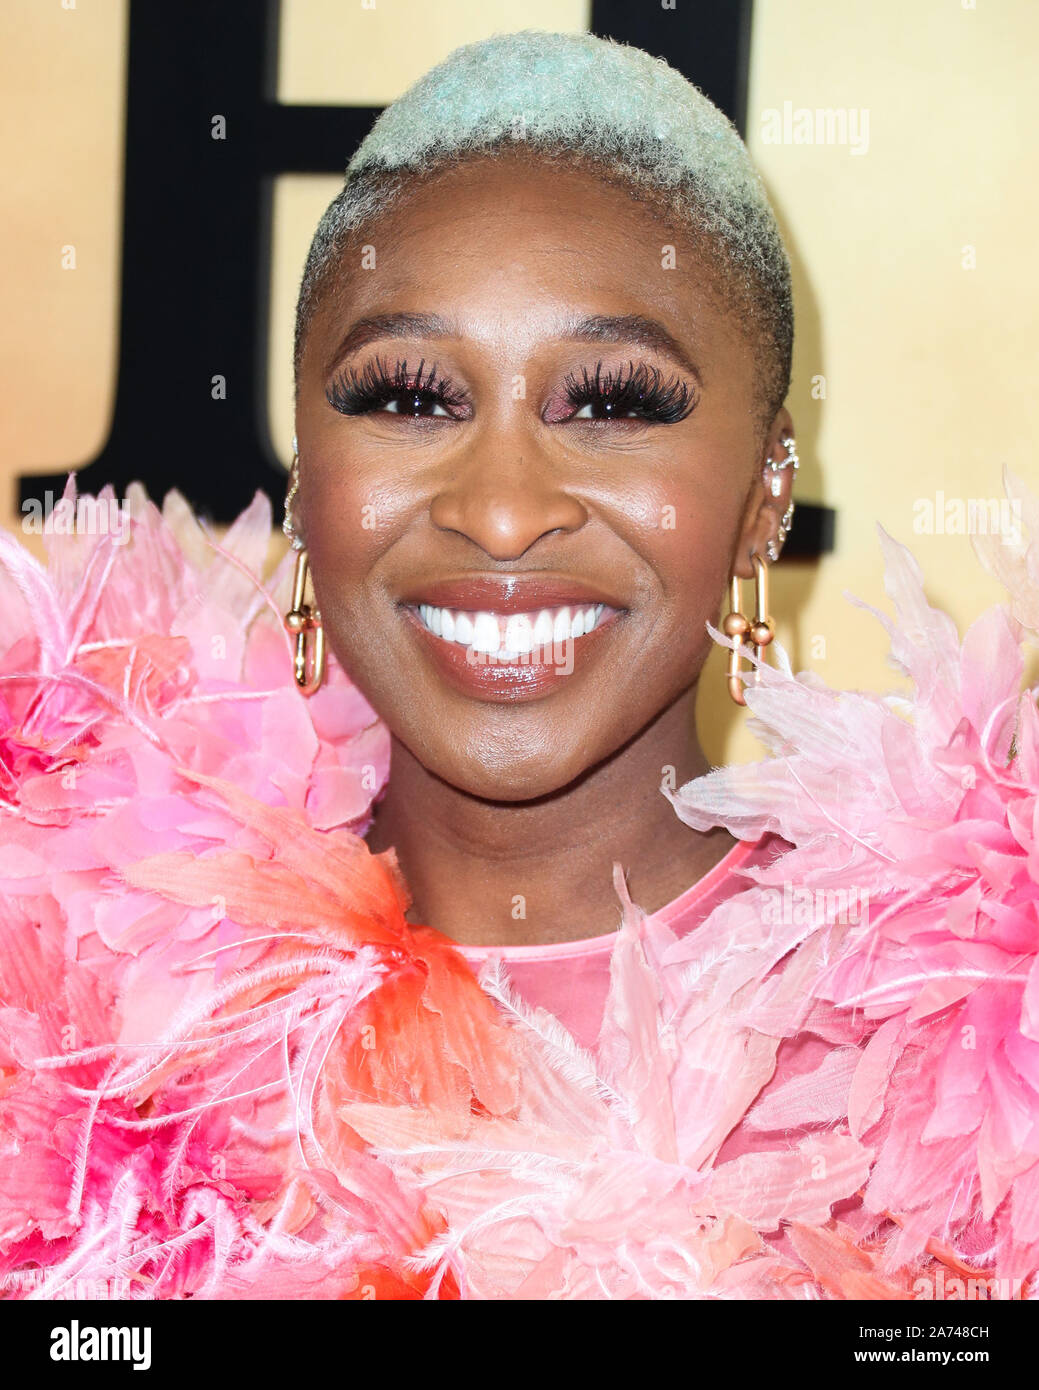 LOS ANGELES, CALIFORNIA, USA - OCTOBER 29: Actress Cynthia Erivo wearing a Marc Jacobs dress arrives at the Los Angeles Premiere Of Focus Features' 'Harriet' held at The Orpheum Theatre on October 29, 2019 in Los Angeles, California, United States. (Photo by Xavier Collin/Image Press Agency) Stock Photo